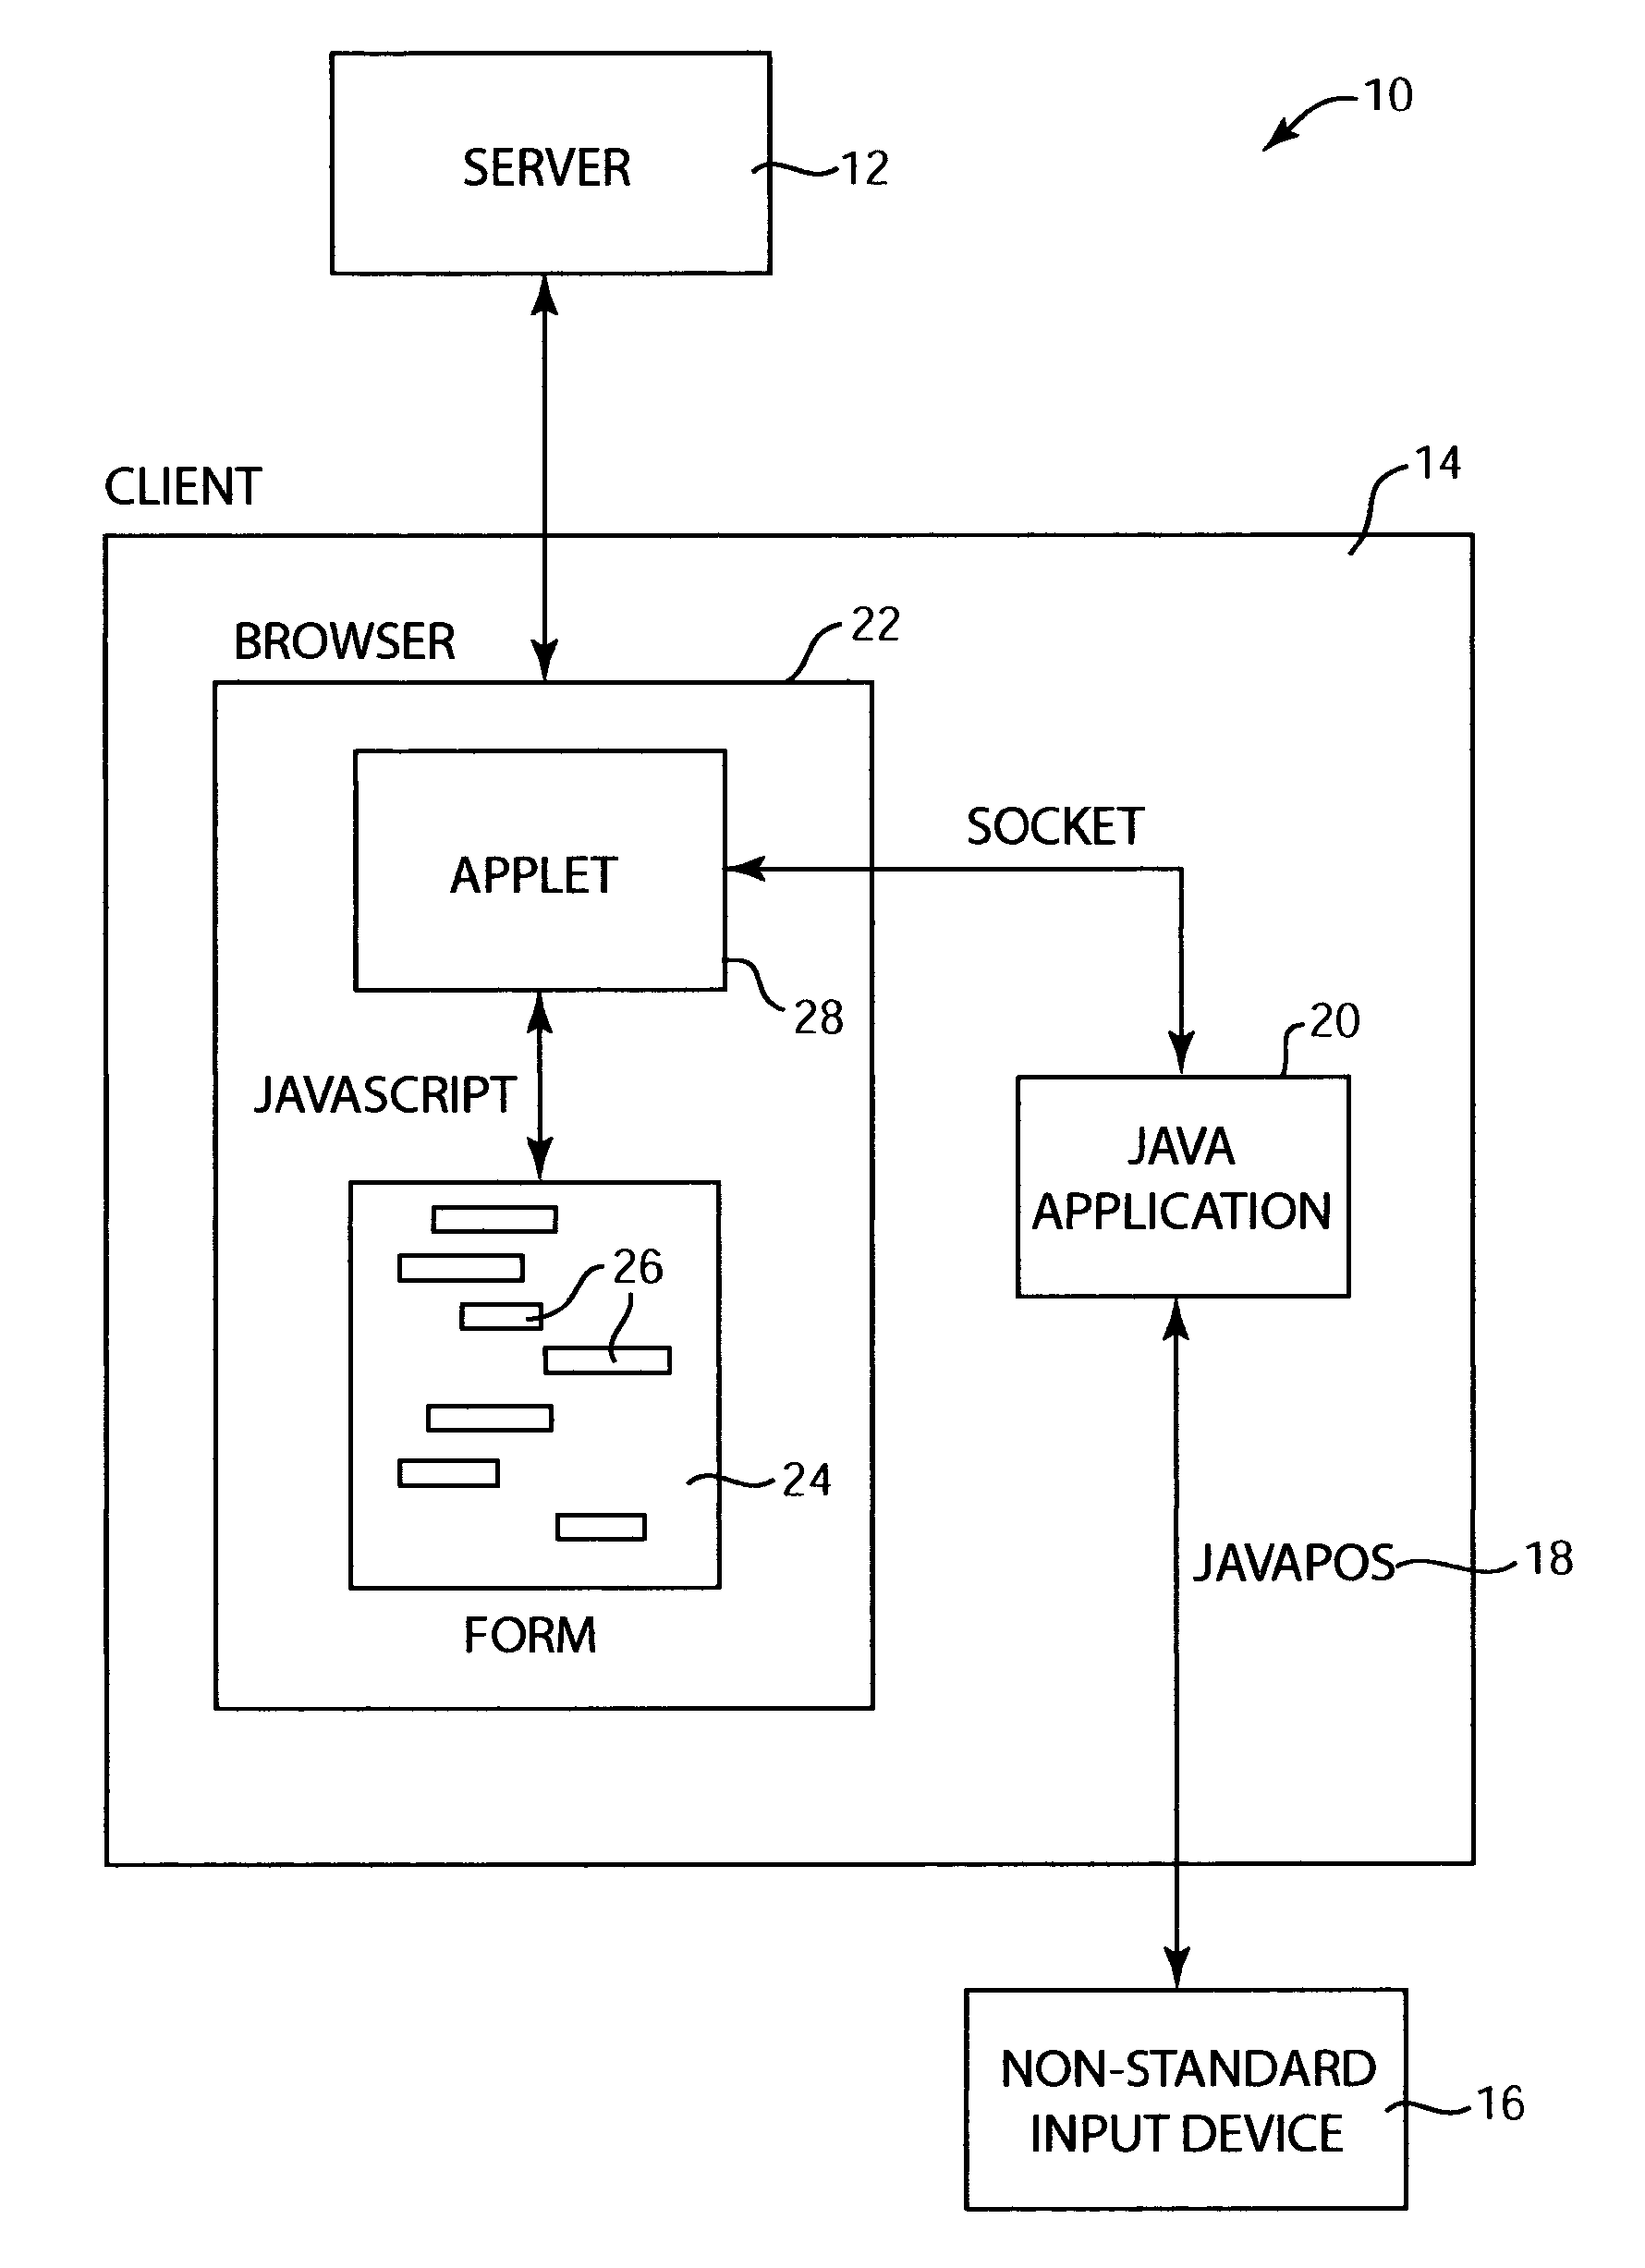 System for input and output of data with non-standard I/O devices for web applications